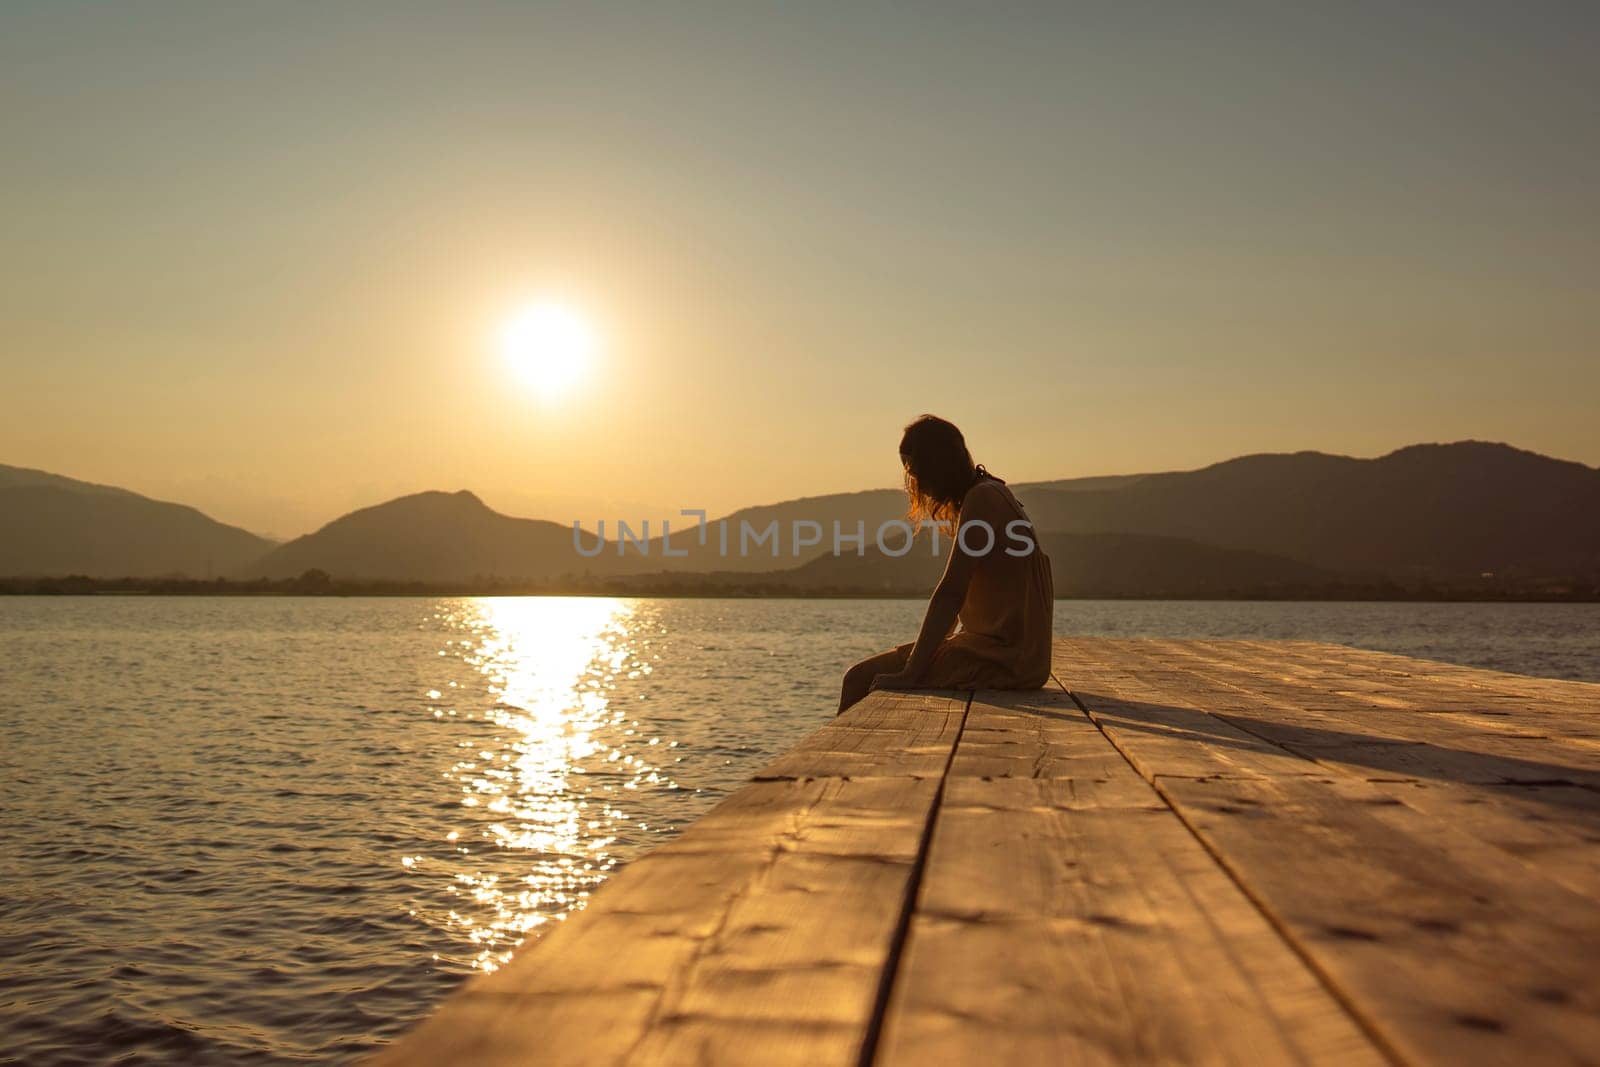 A thoughtful young Caucasian woman sits alone on a lake pier, gazing at the water during a sunset, in a vintage orange ambiance.